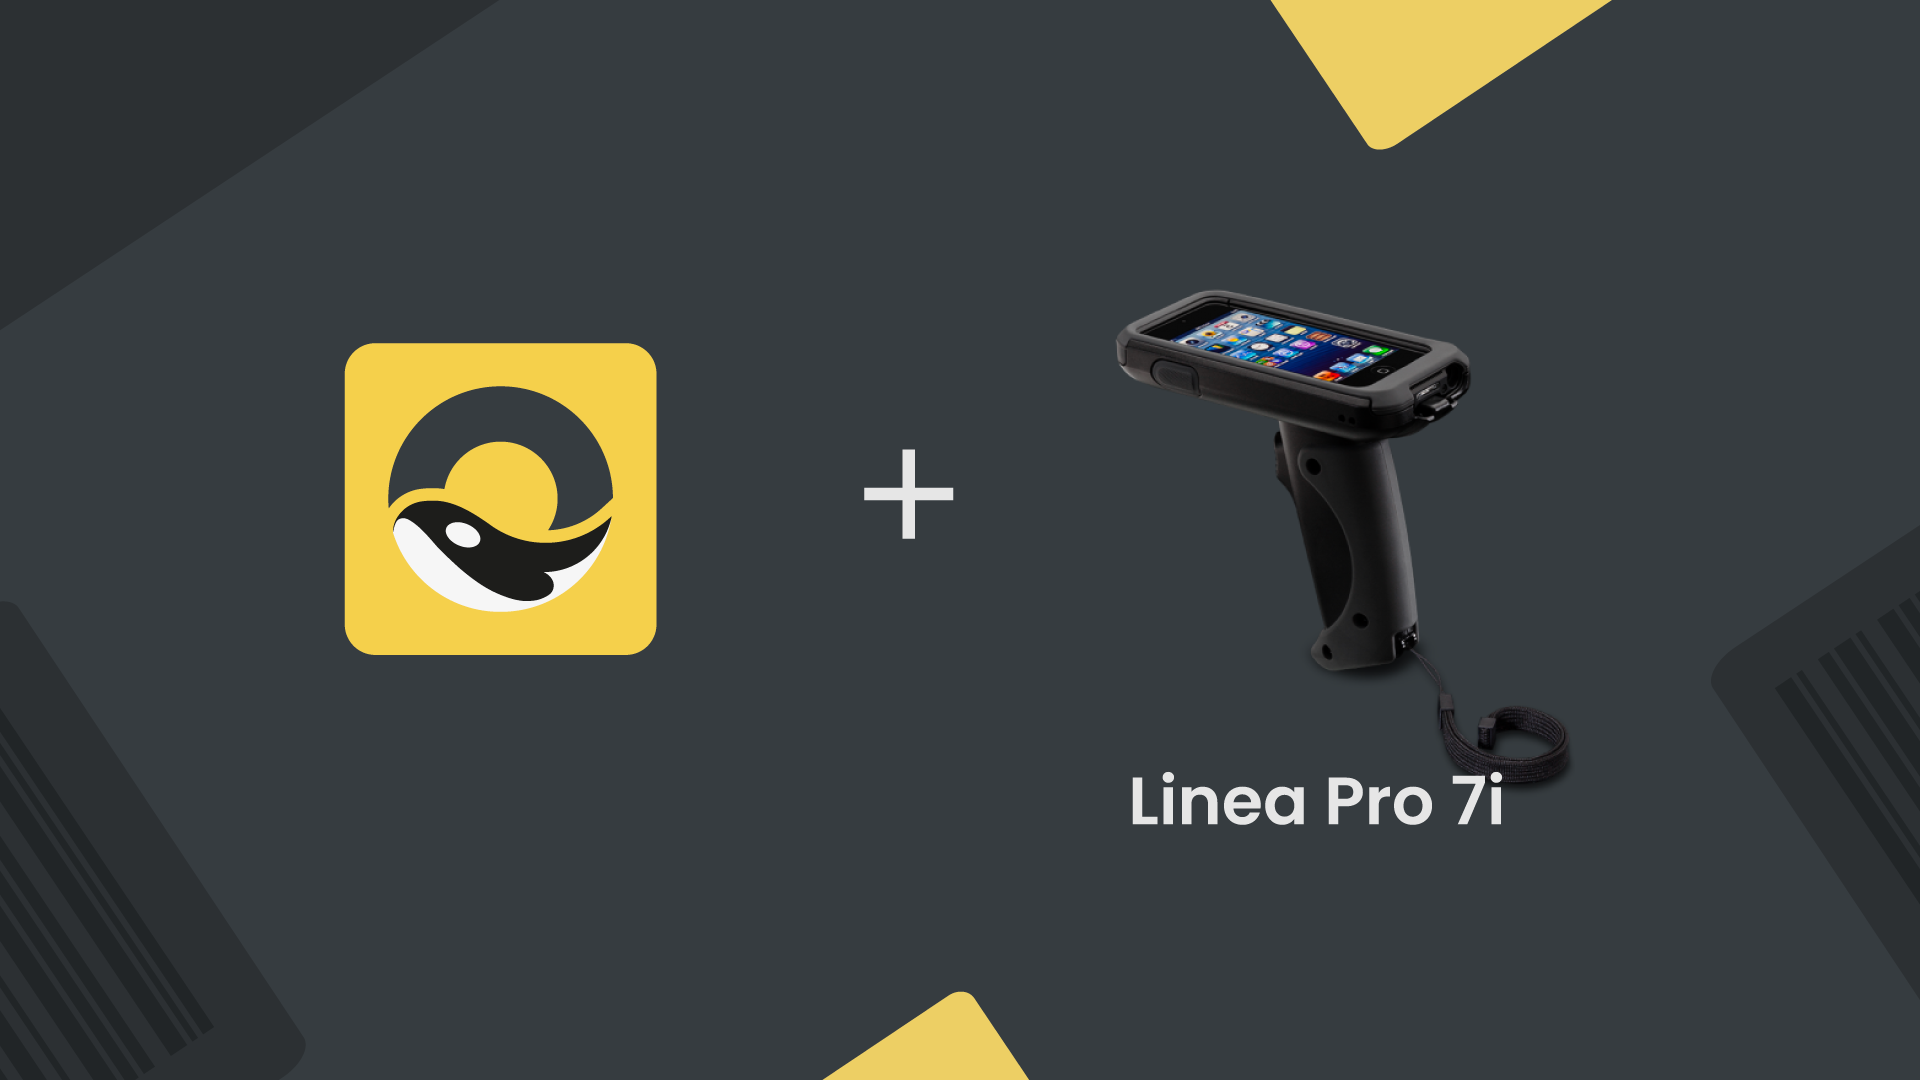 Using the Linea Pro 7i scanner with Orca Scan